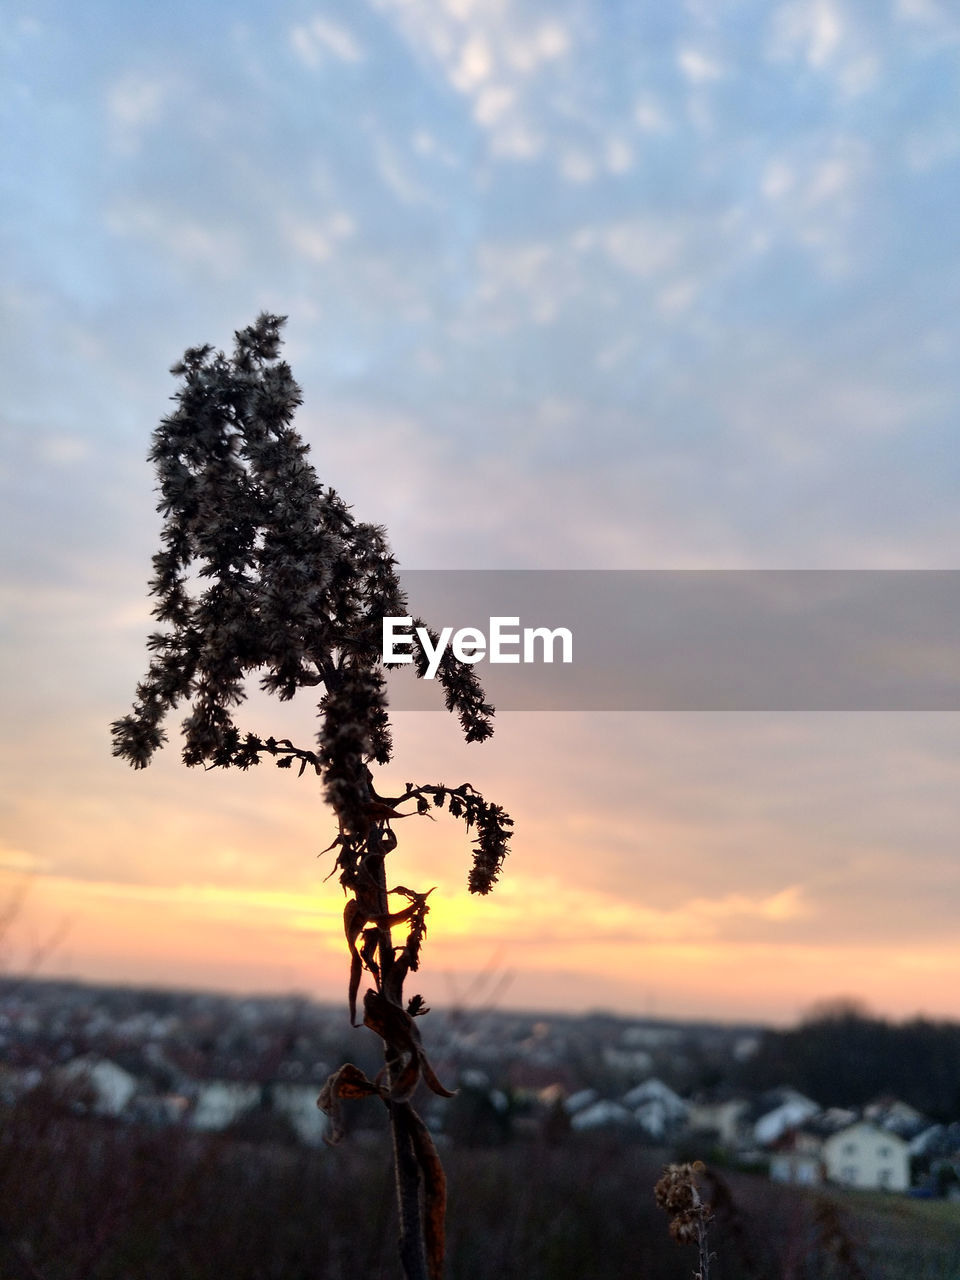 TREE AGAINST SKY DURING SUNSET